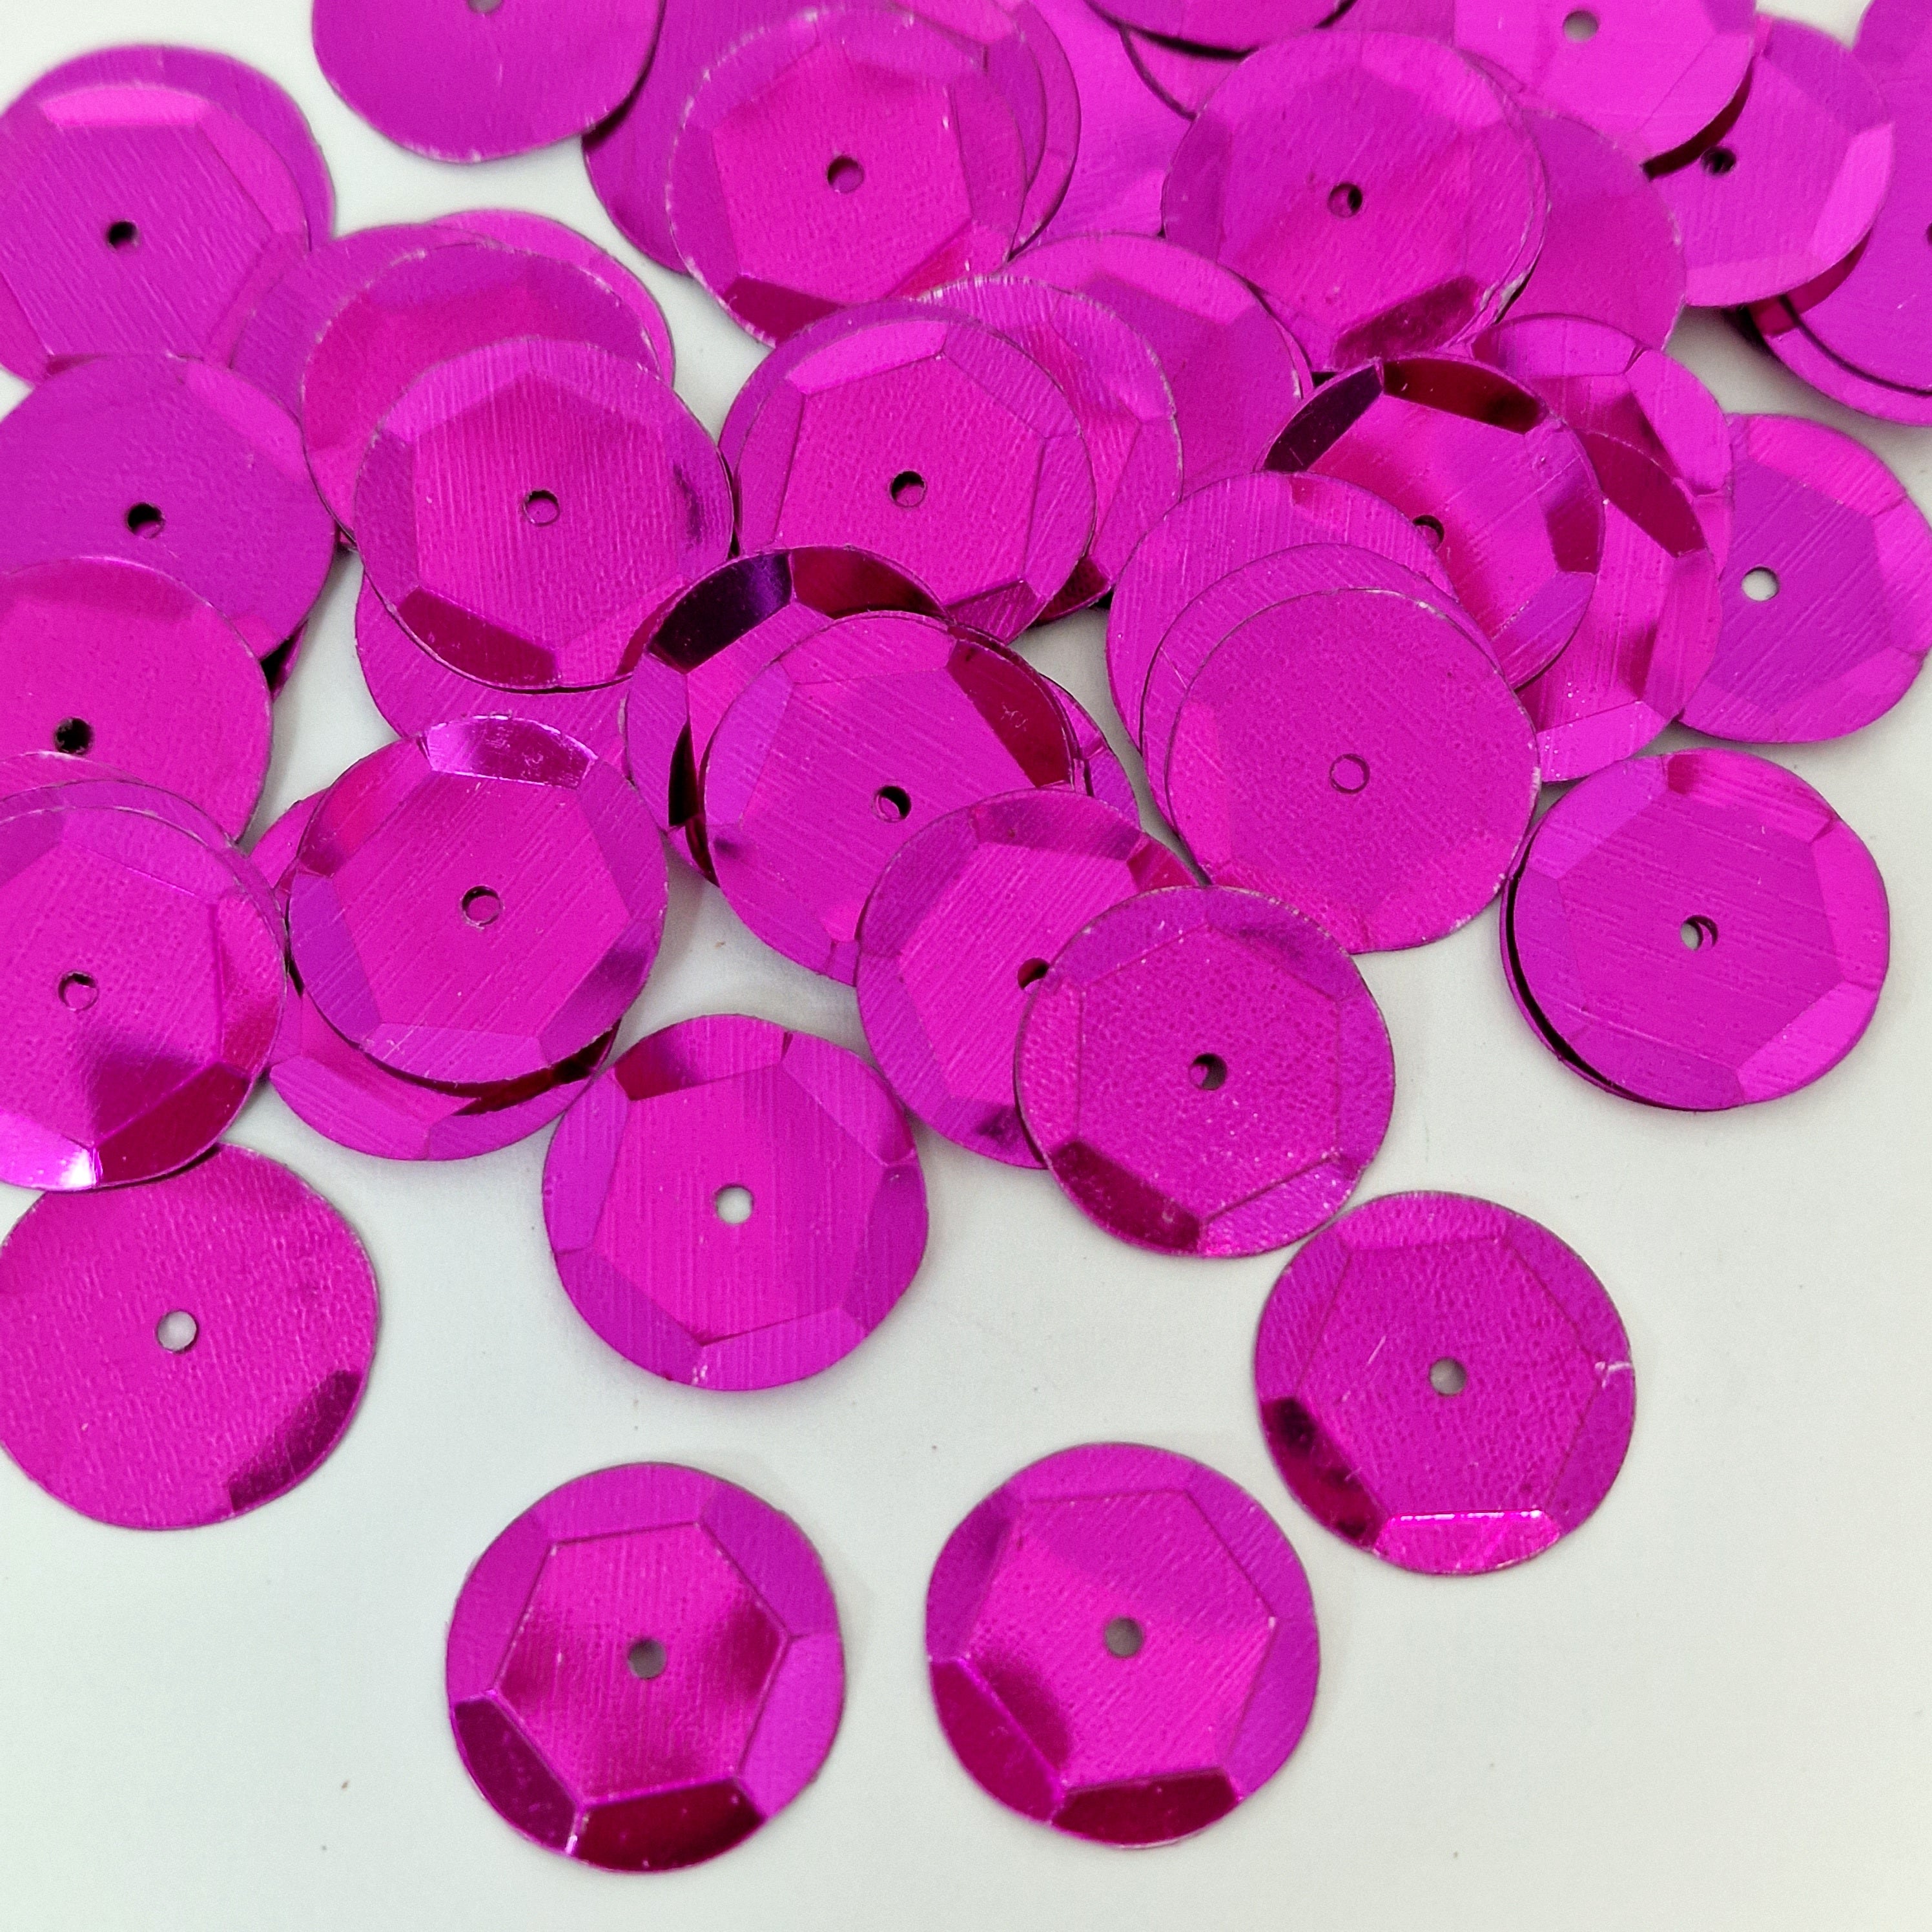 MajorCrafts 40grams 15mm Dark Pink Large Round Sew-On Cup Sequins